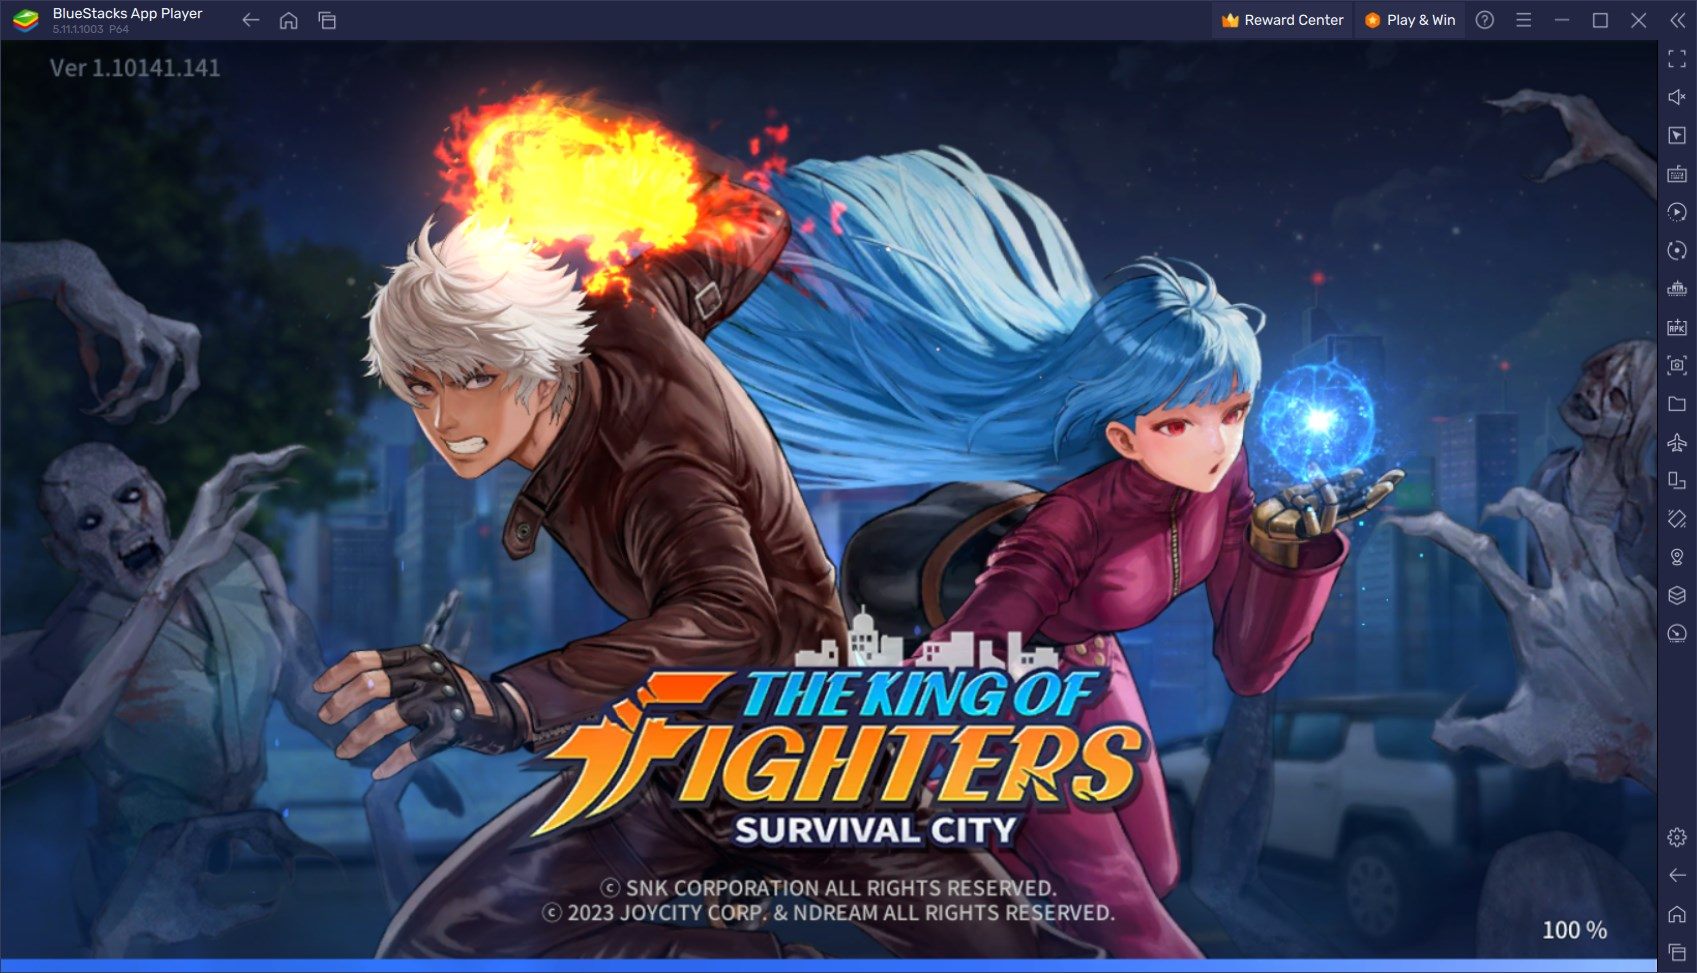 King of Fighters: Survival City on PC - How to Enhance Your Gameplay With Our BlueStacks Tools and Features